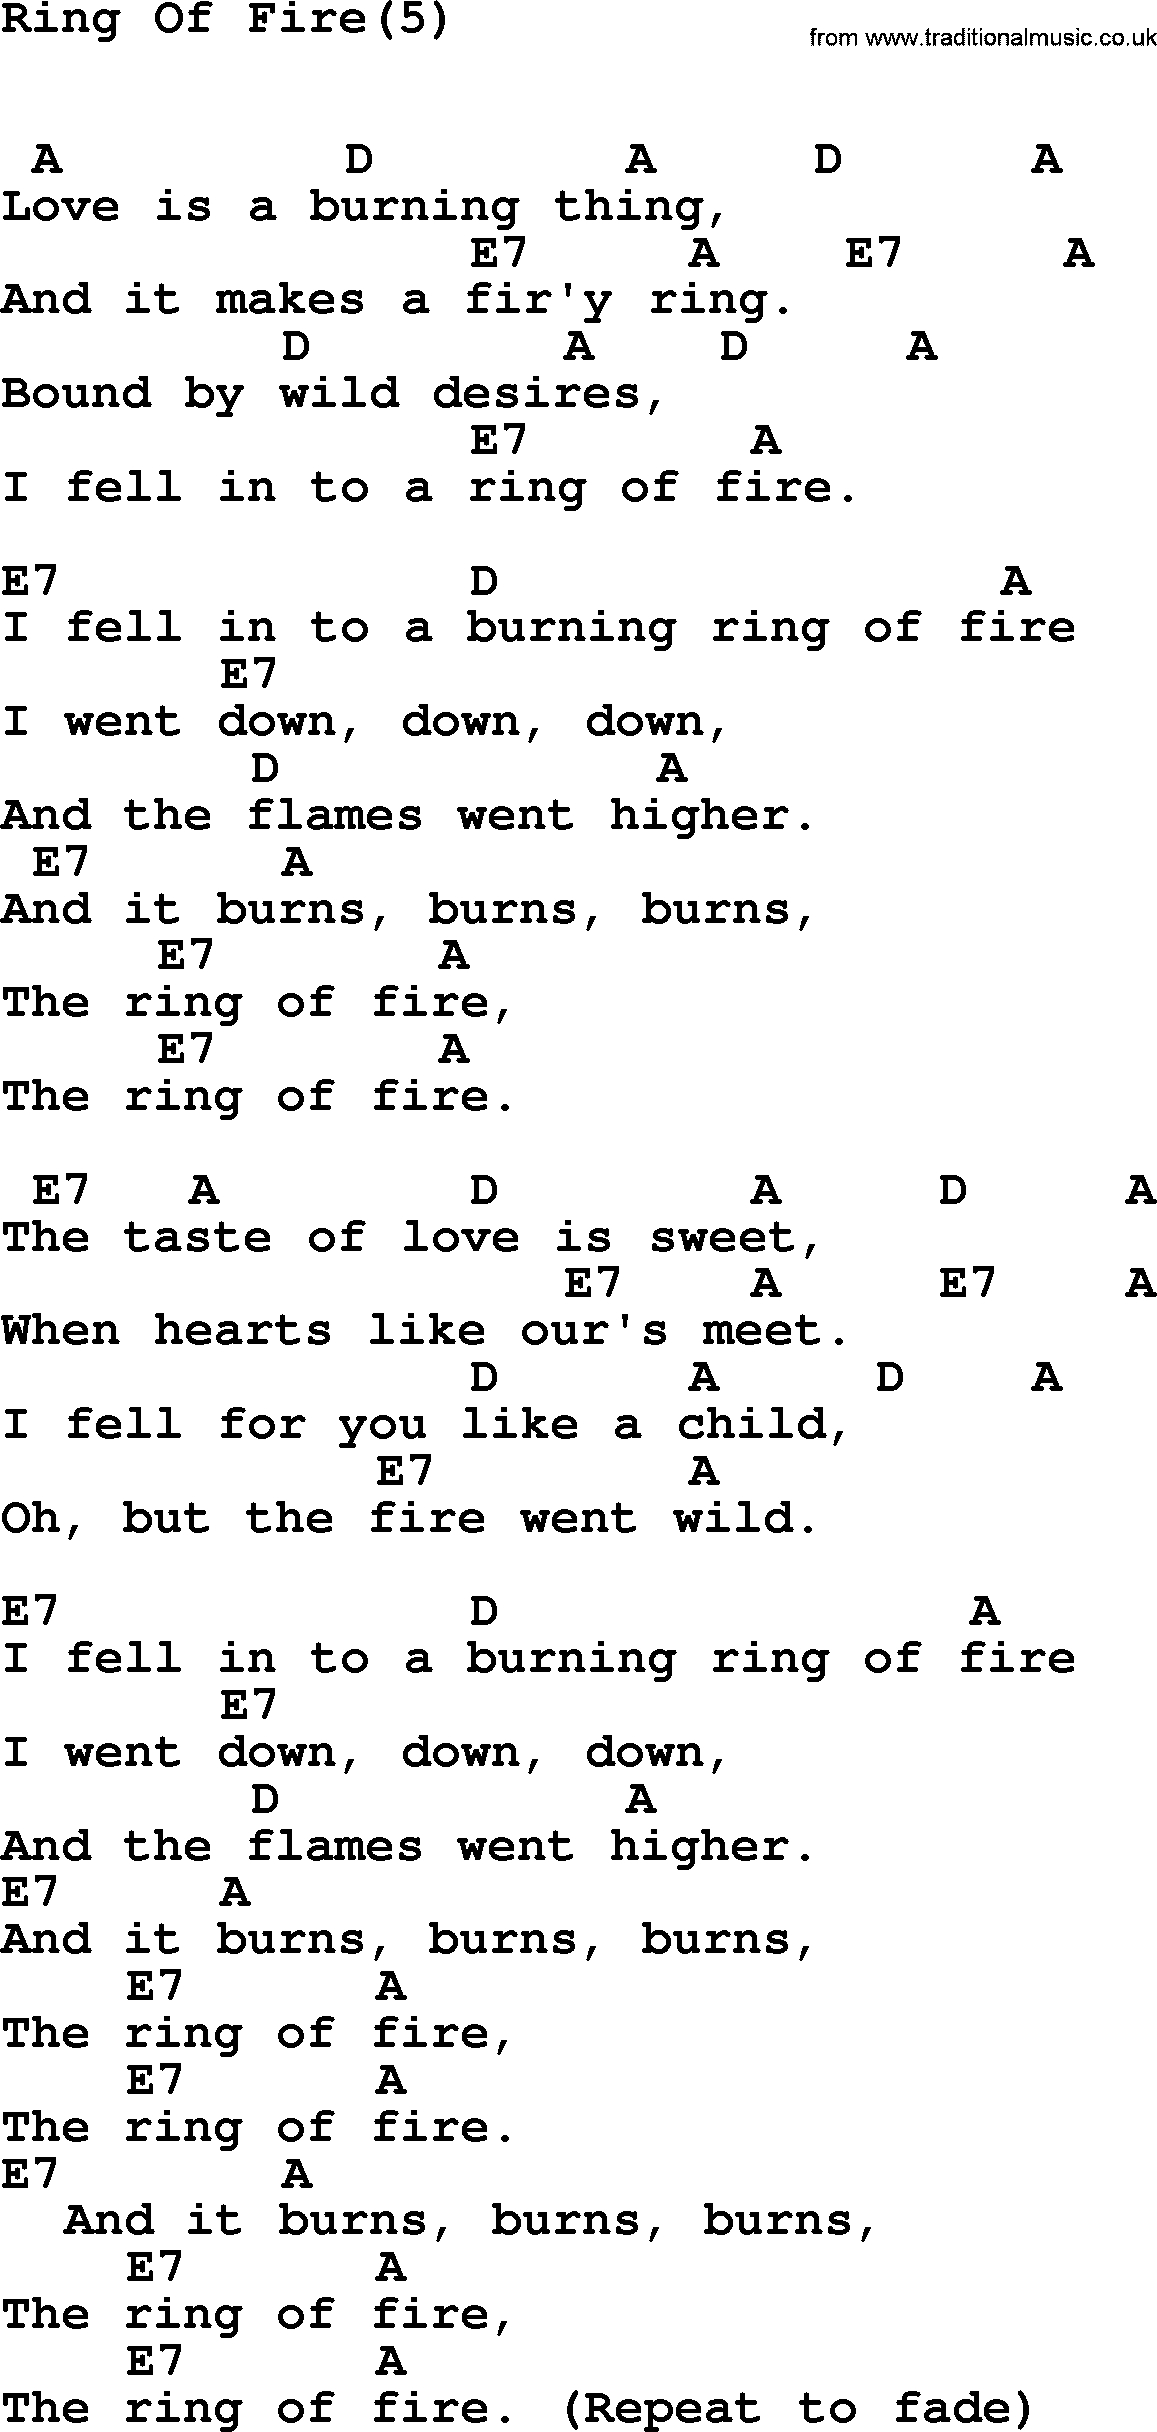 Ring Of Fire Chords Johnny Cash Song Ring Of Fire5 Lyrics And Chords